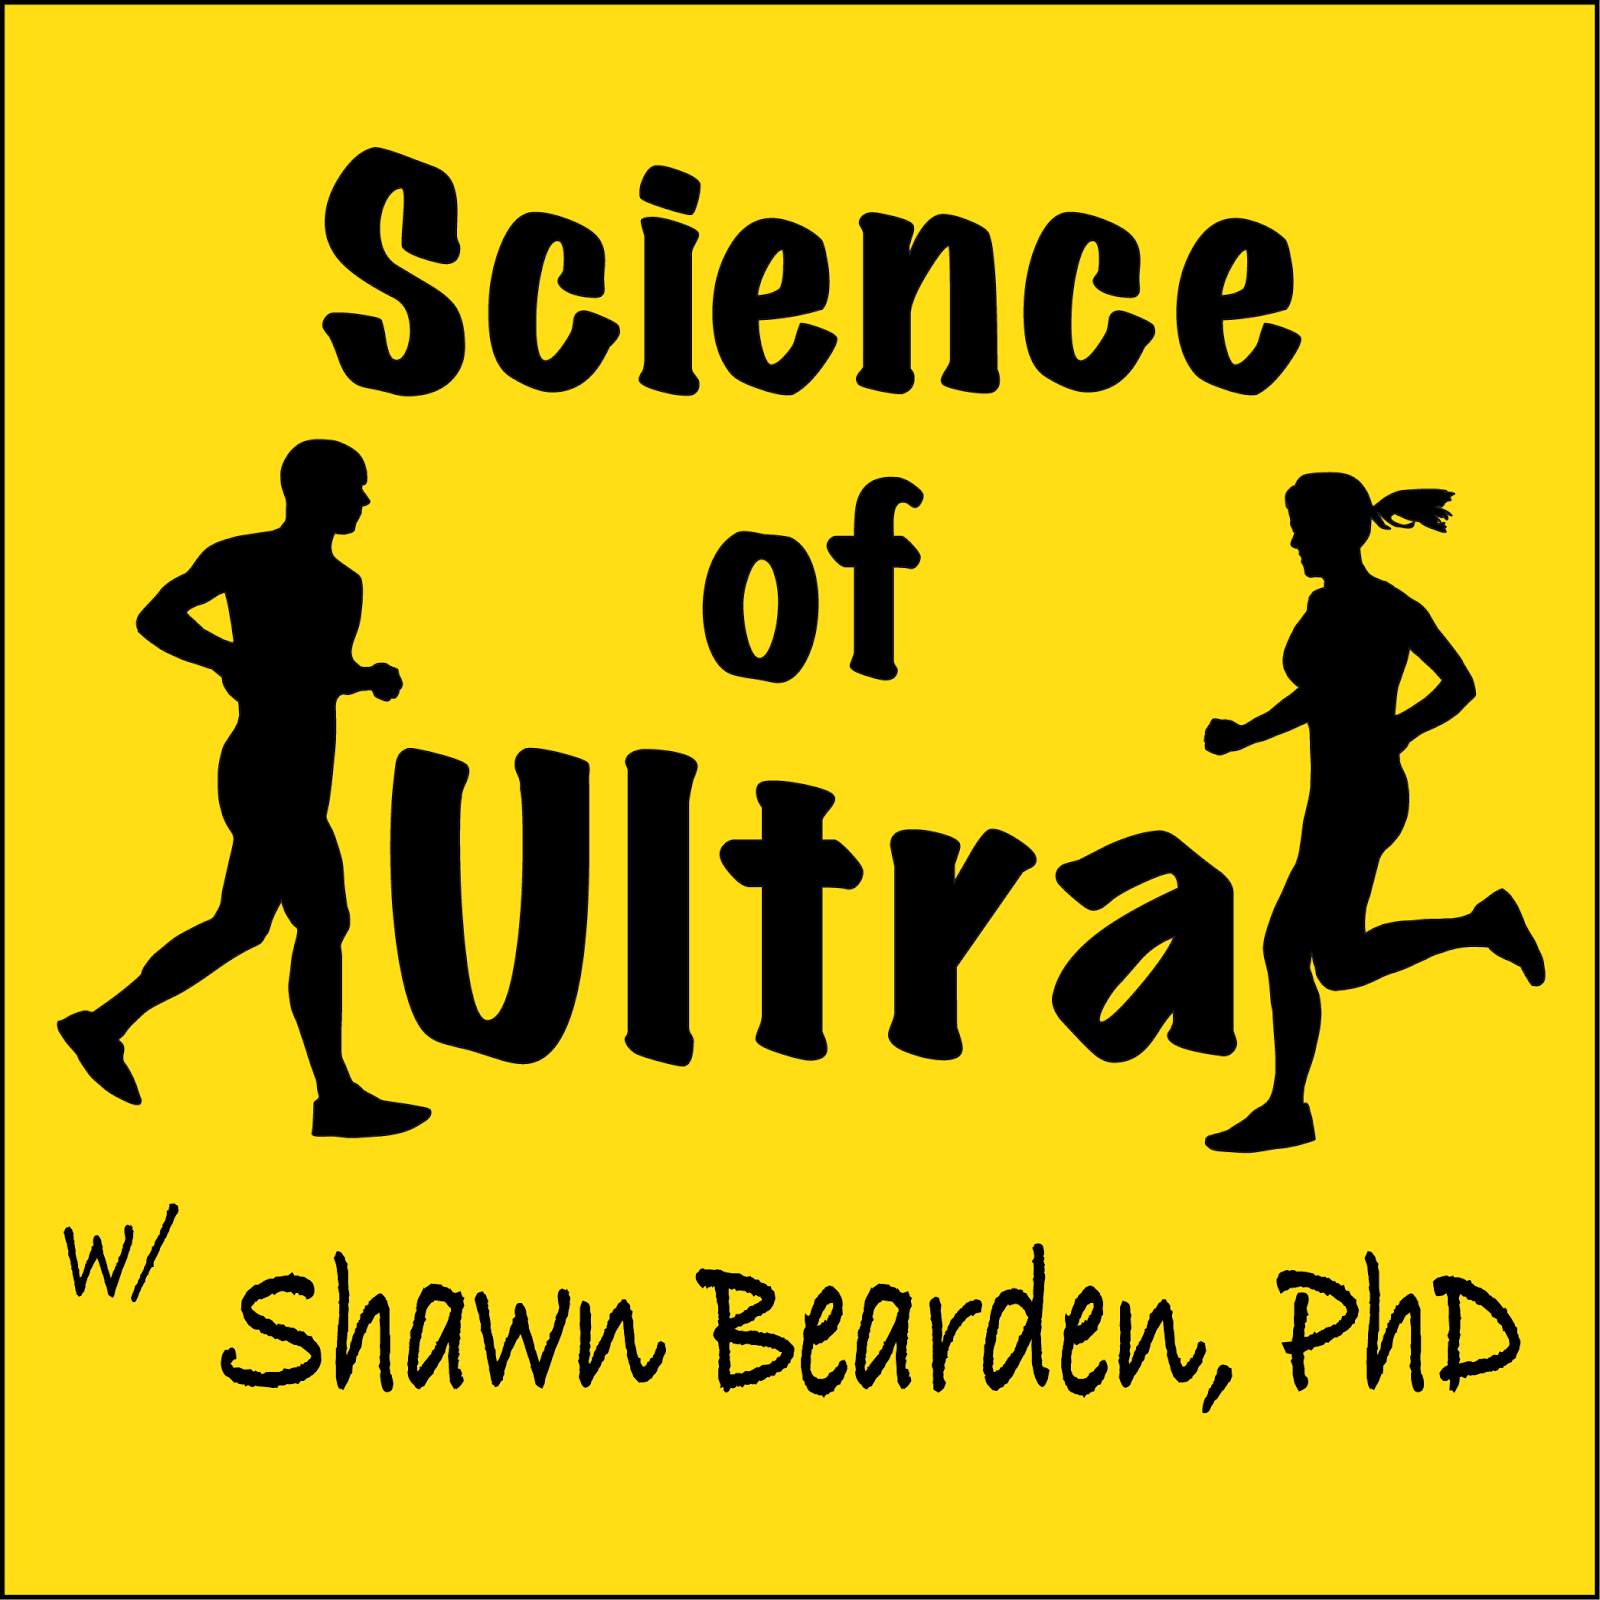 Listen to my interview with "Science of Ultra"